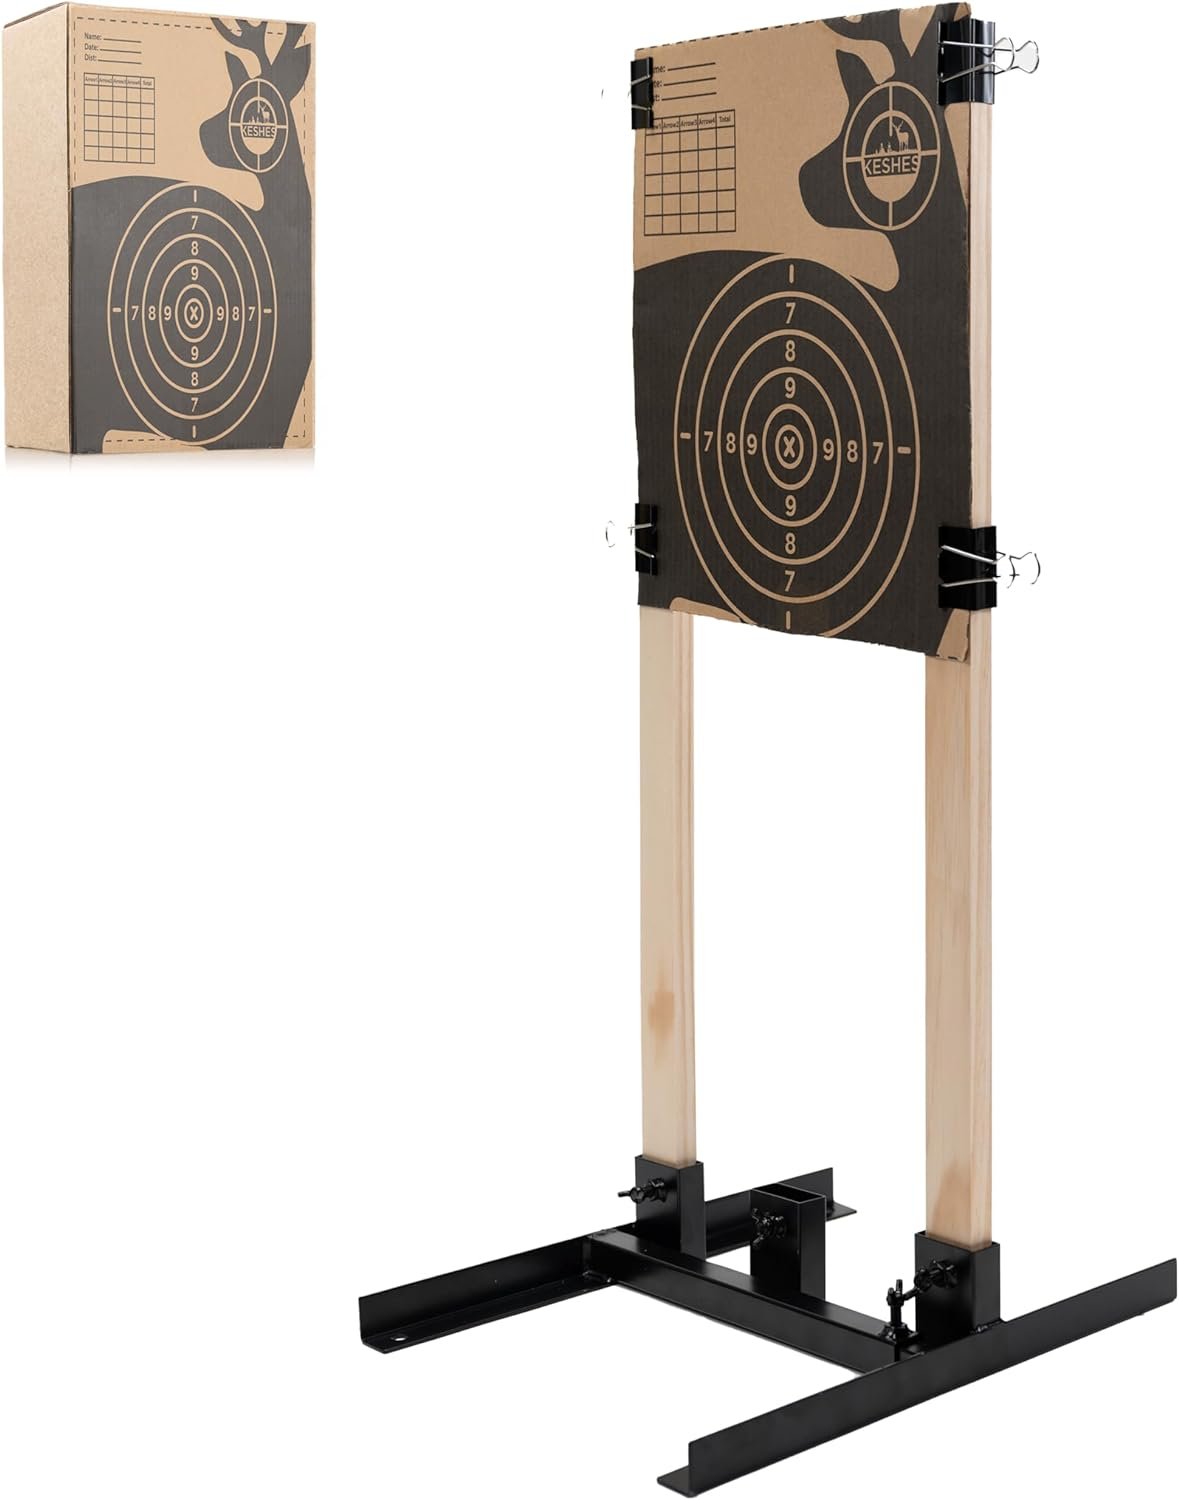 Keshes Target Stand Base Review